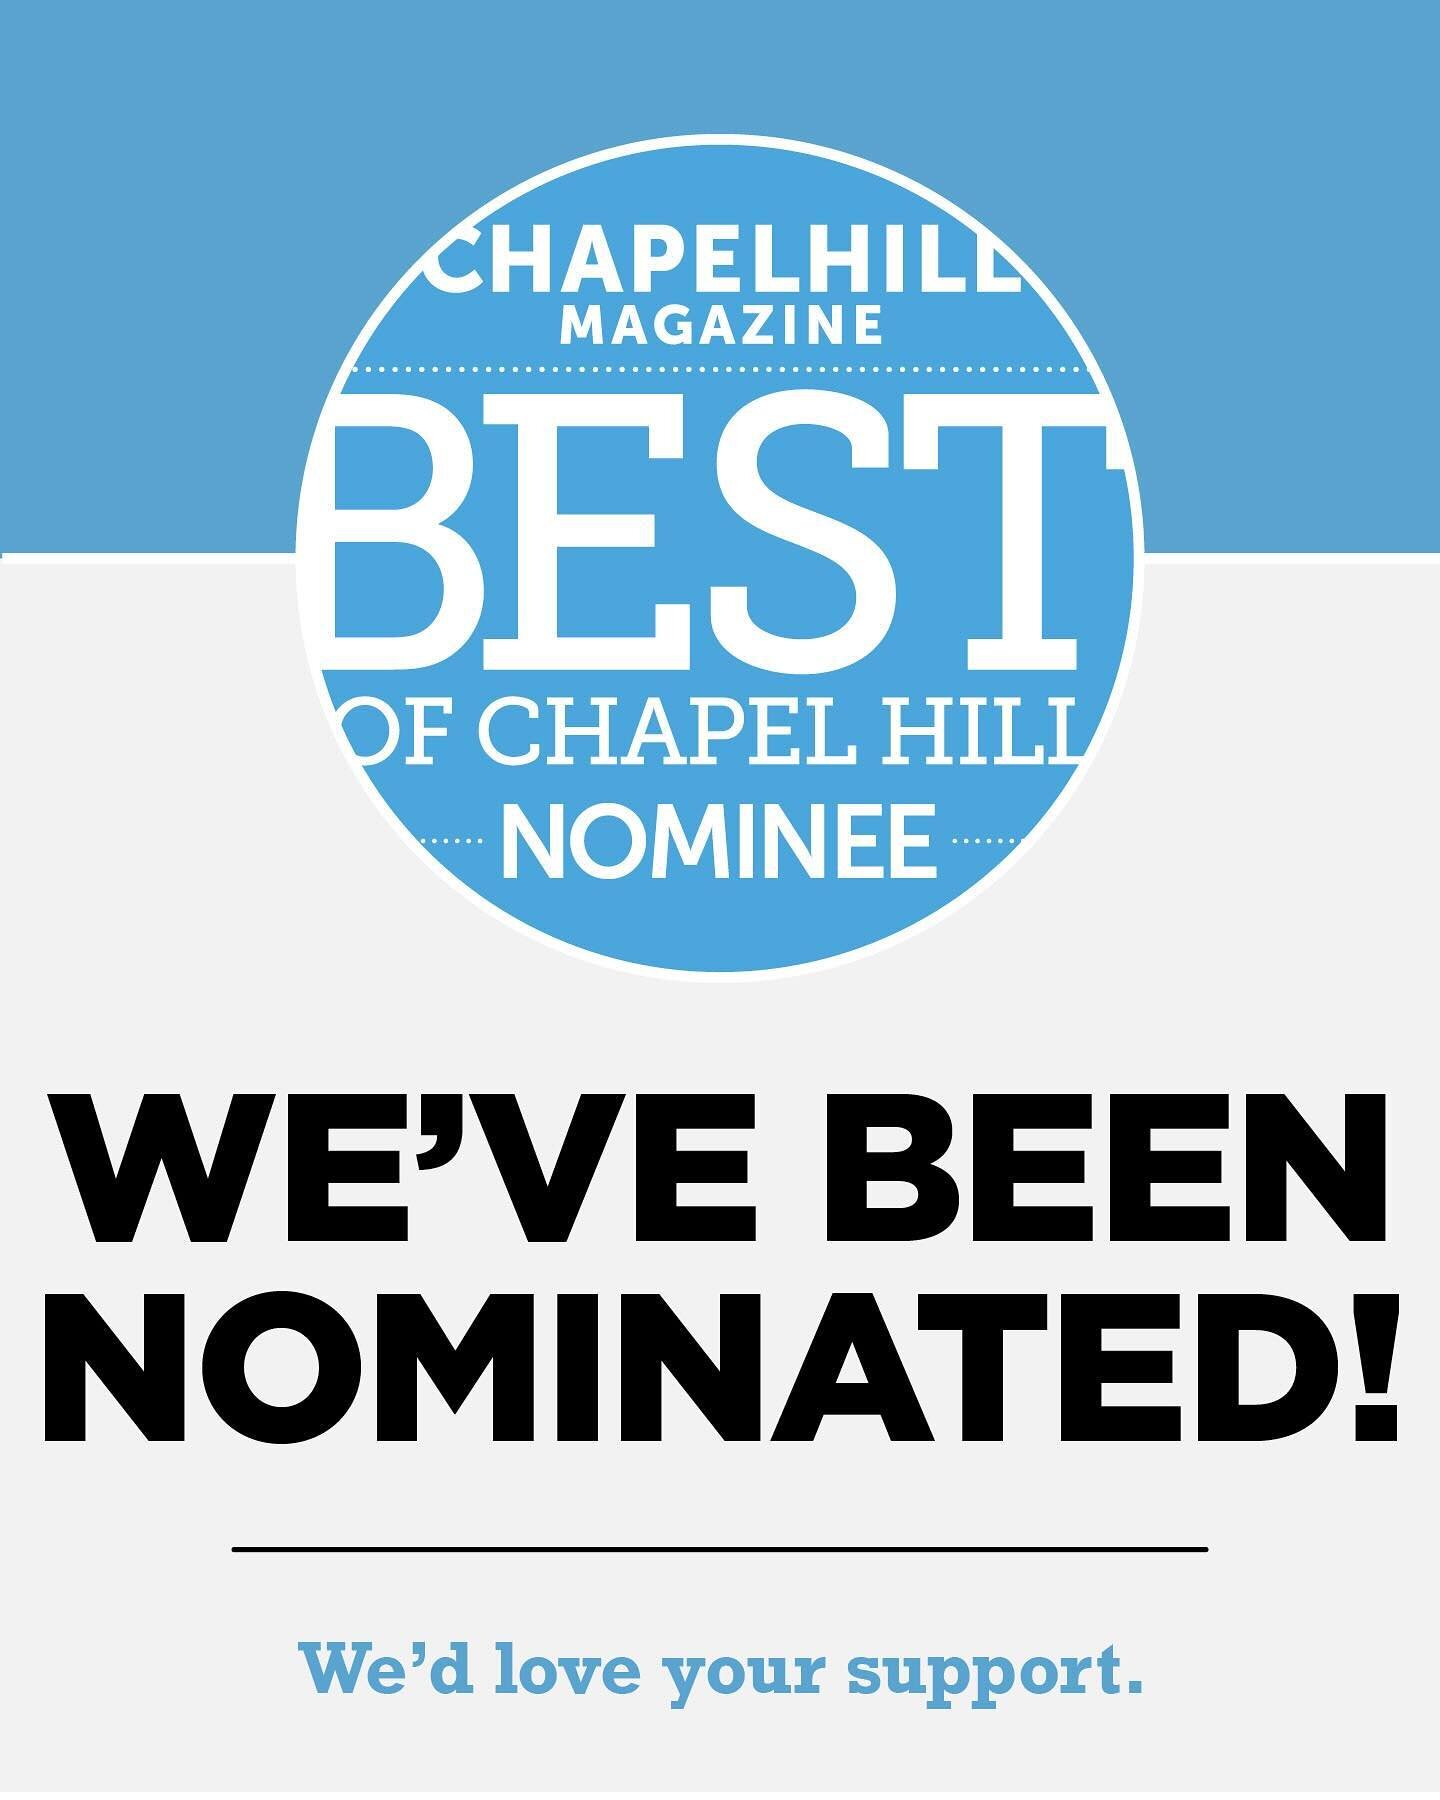 There are so many wonderful salons in the area we are happy to be nominated!  If you would like to vote for your Chapel Hill favorites head over to Chapel Hill Magazine.  Thank you all for your support!  It means so much to this small women owned and